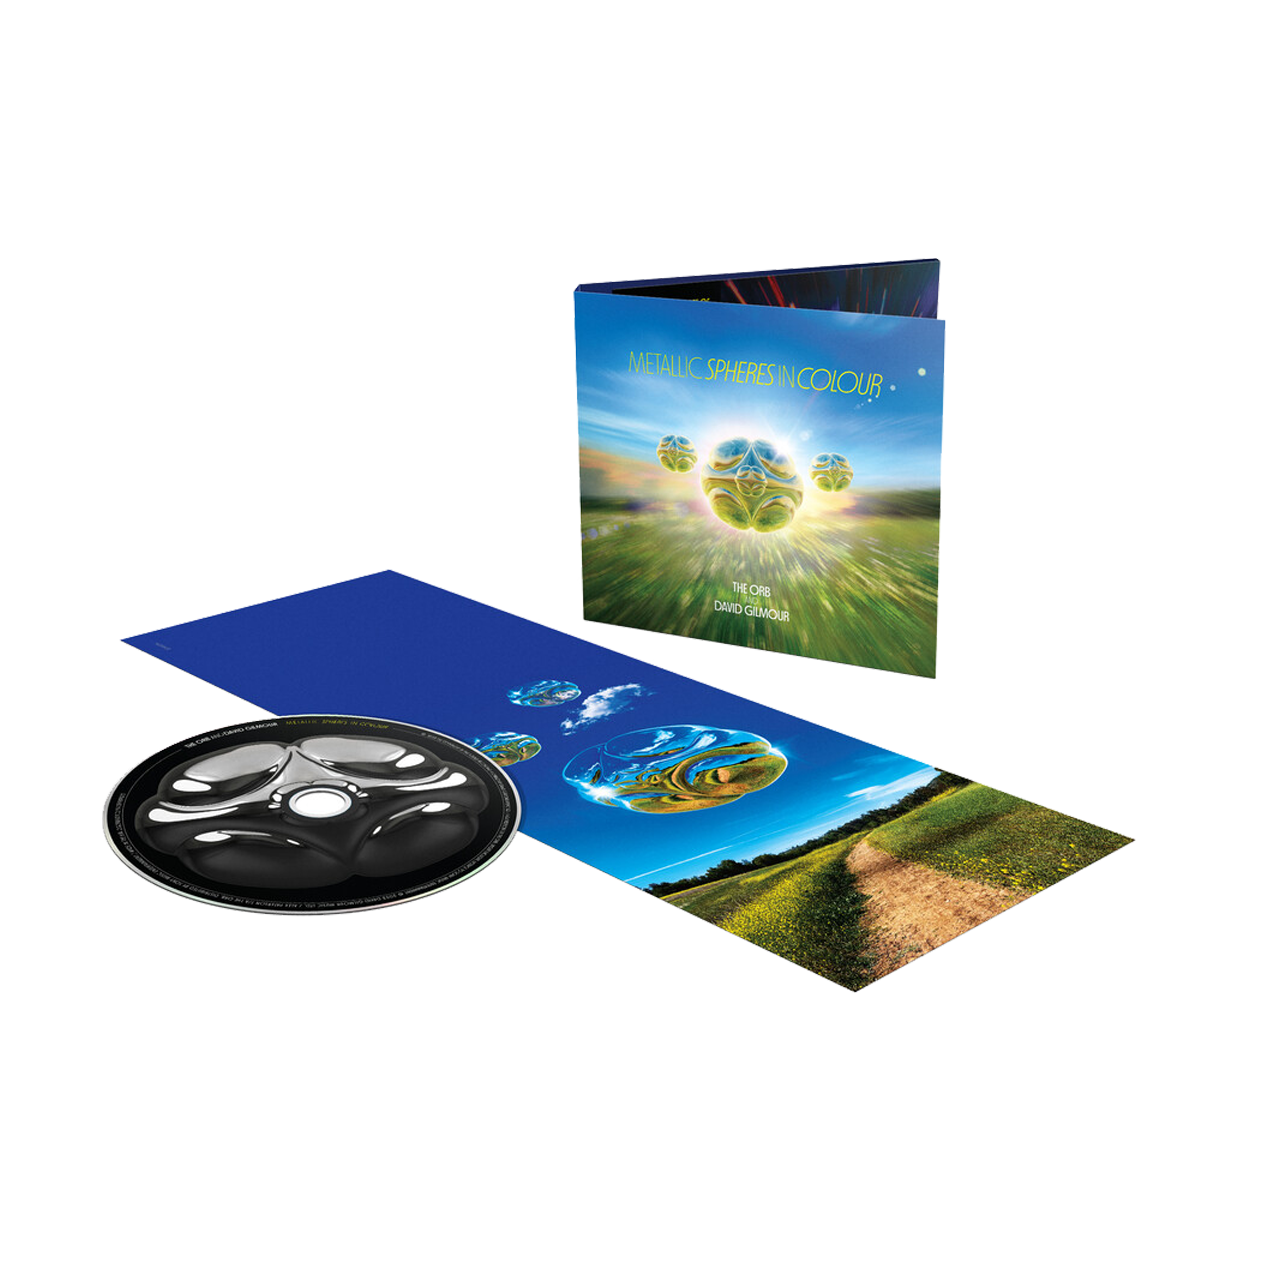 The Orb Featuring David Gilmour - Metallic Spheres In Colour: CD